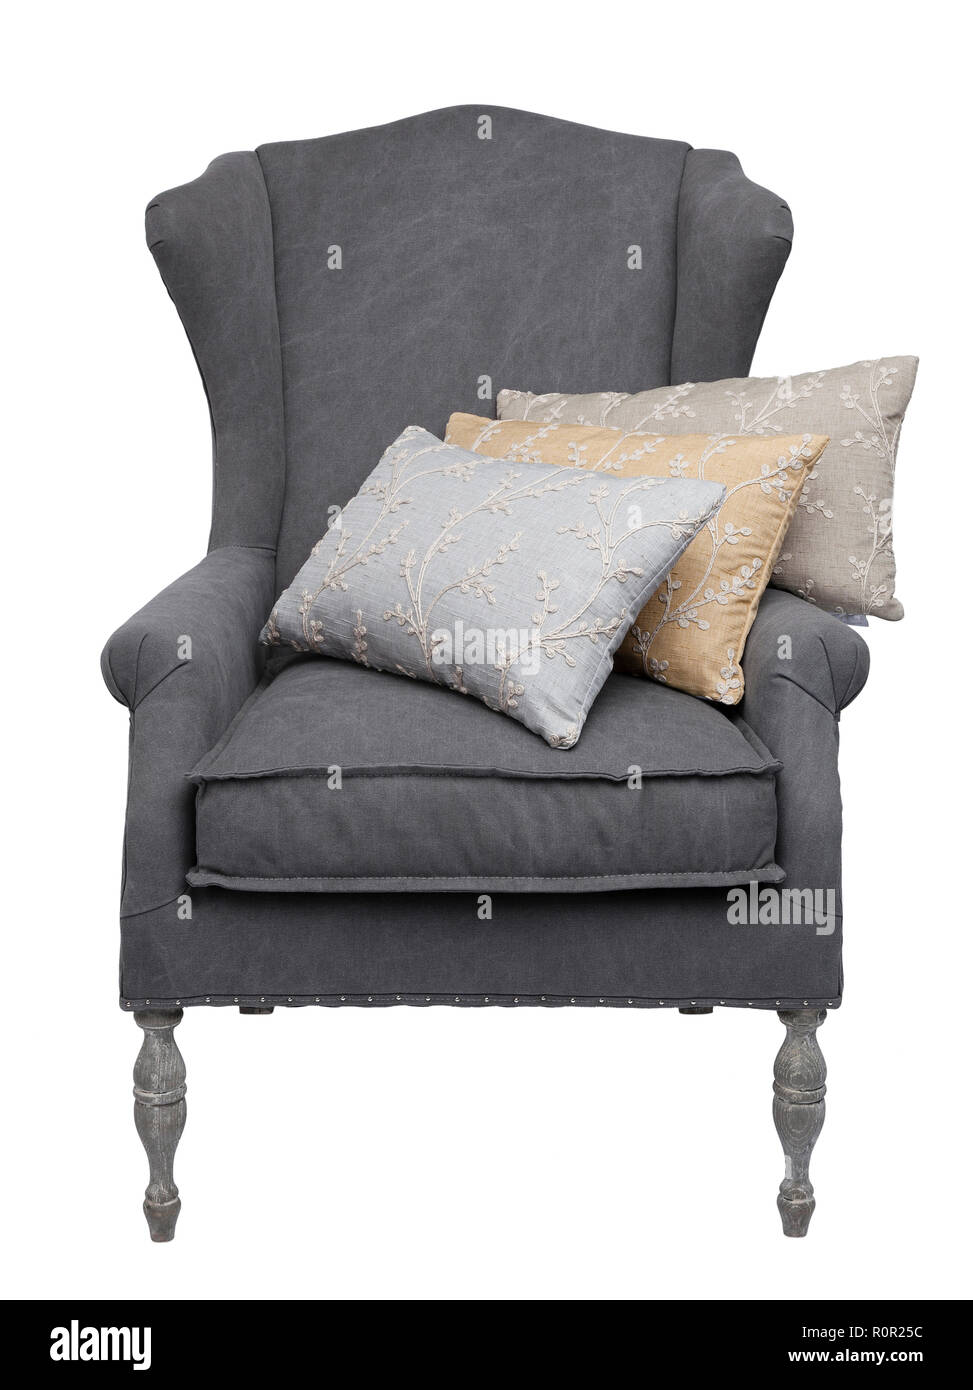 Traditional grey arm chair with 3 floral cushions, isolated on a white background. Stock Photo